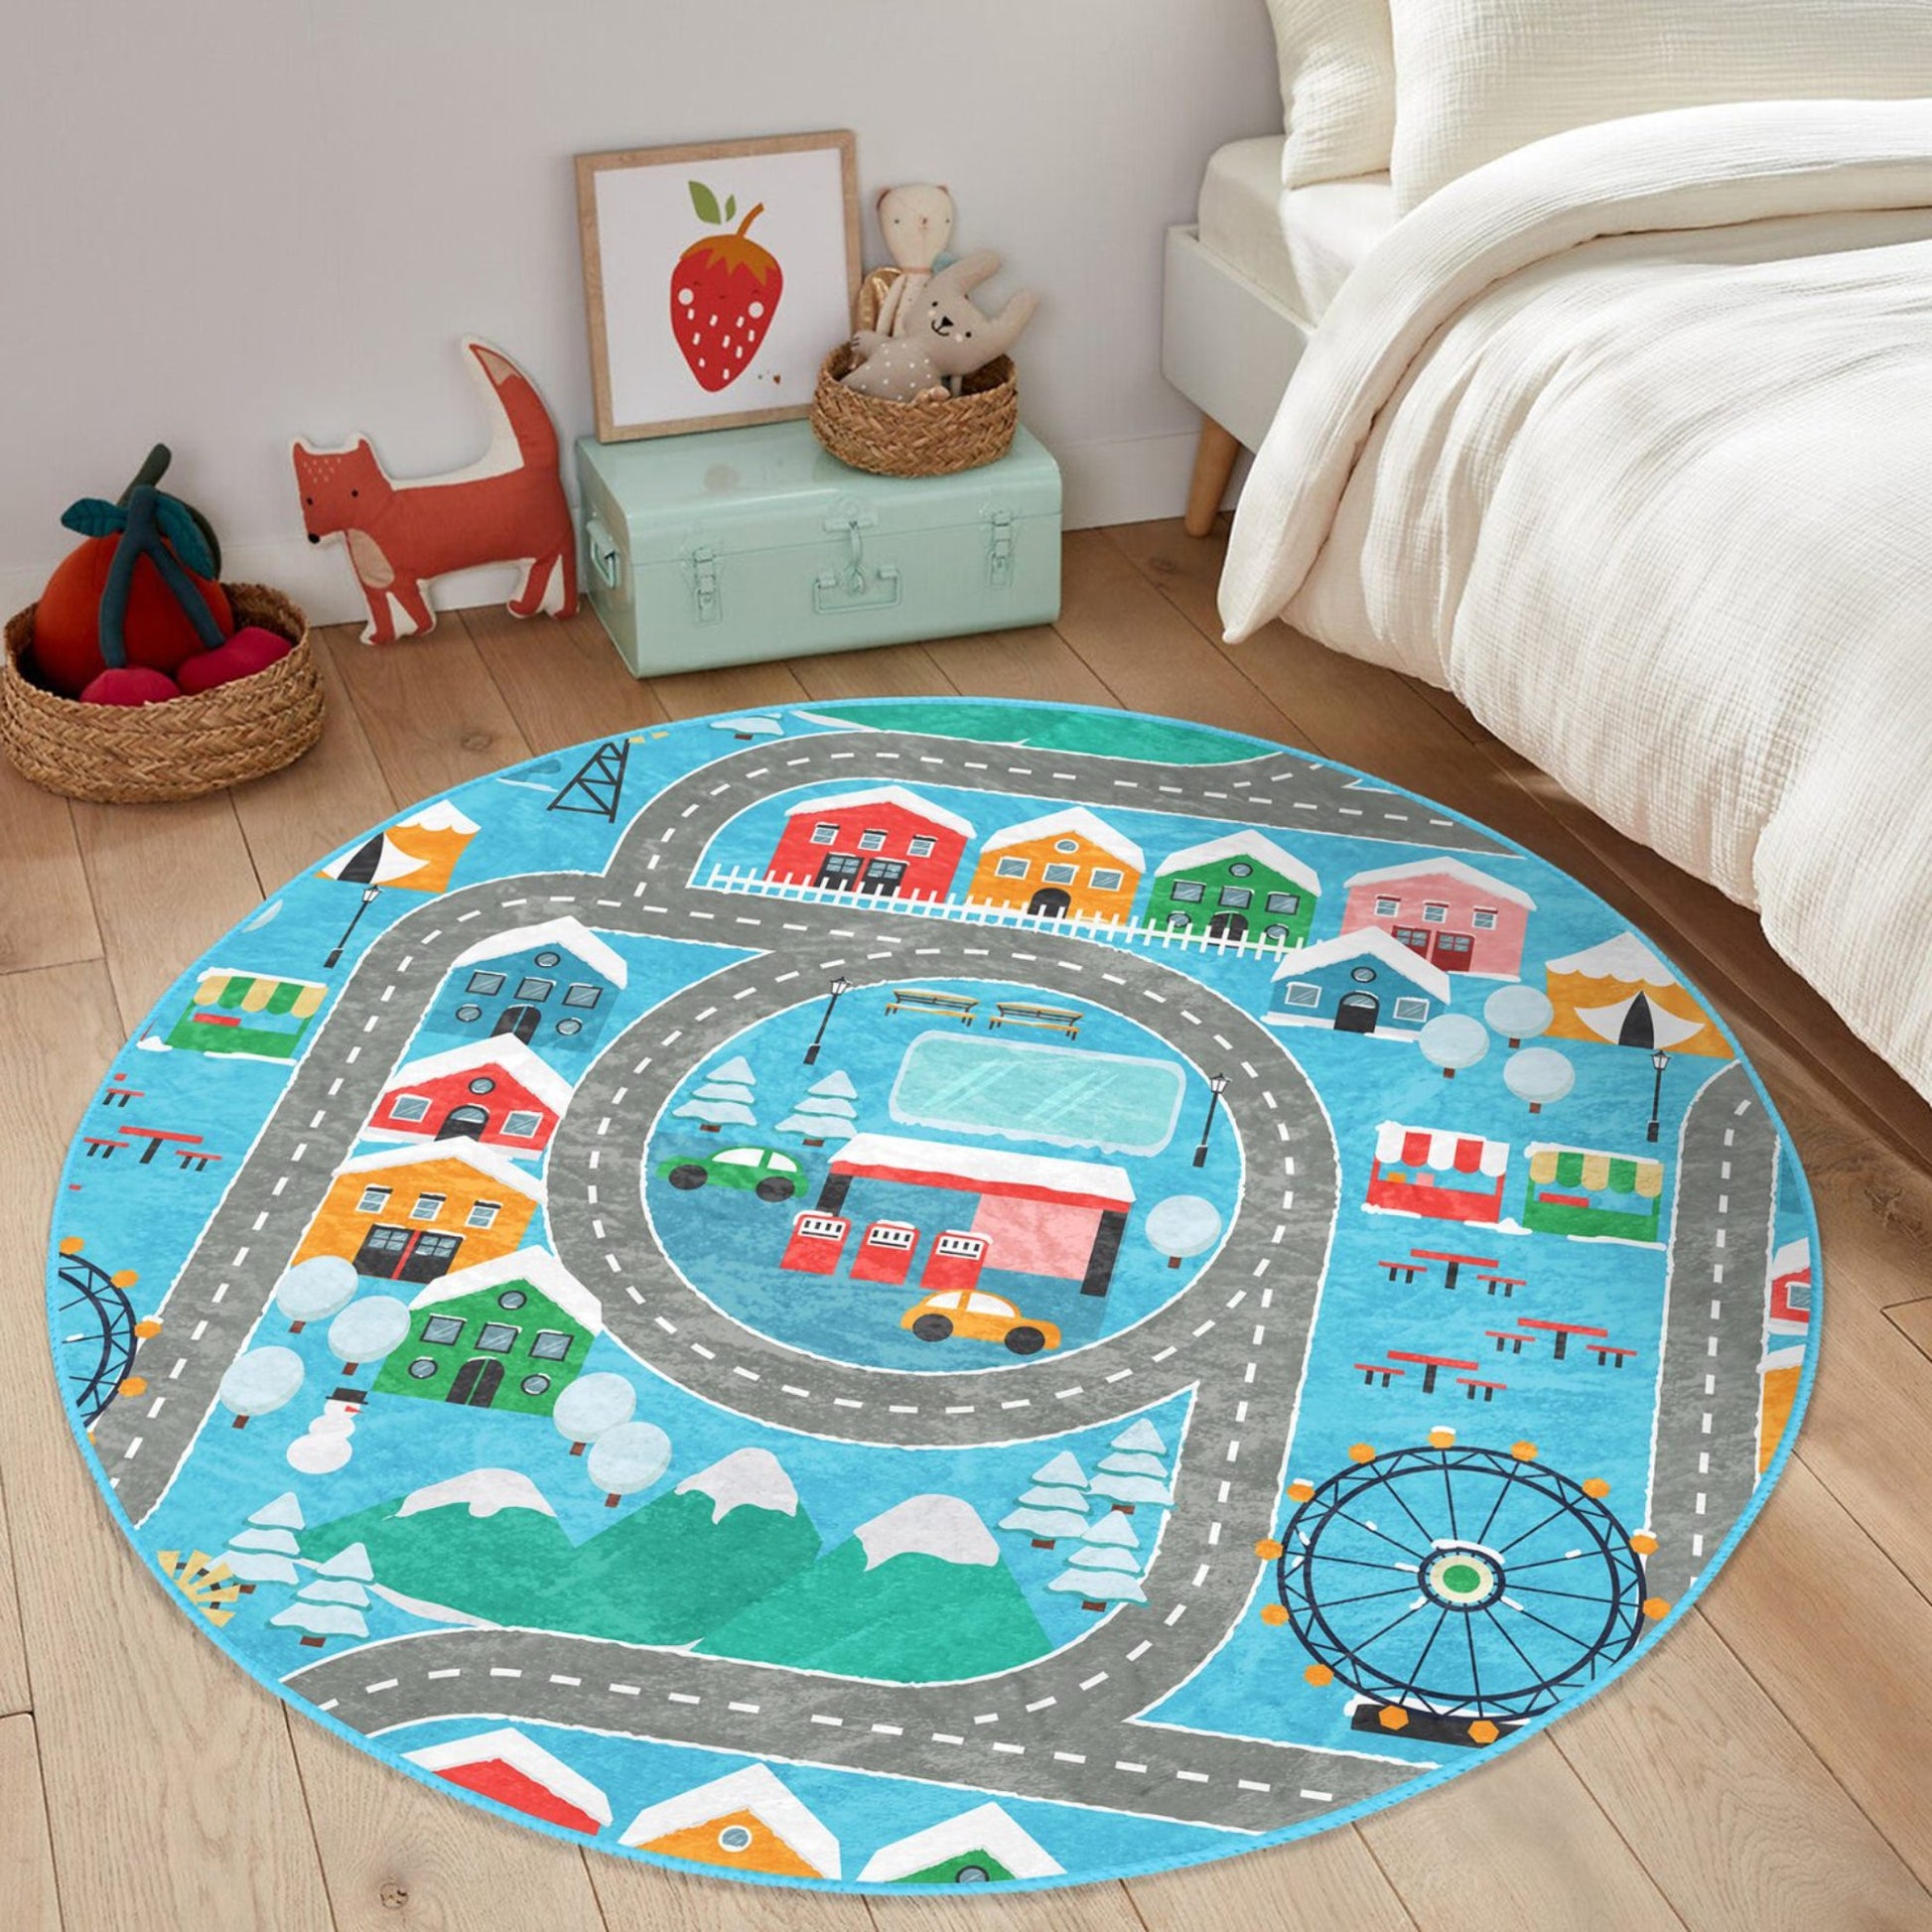 Round City Road Patterned Floor Rug - Charming Charm